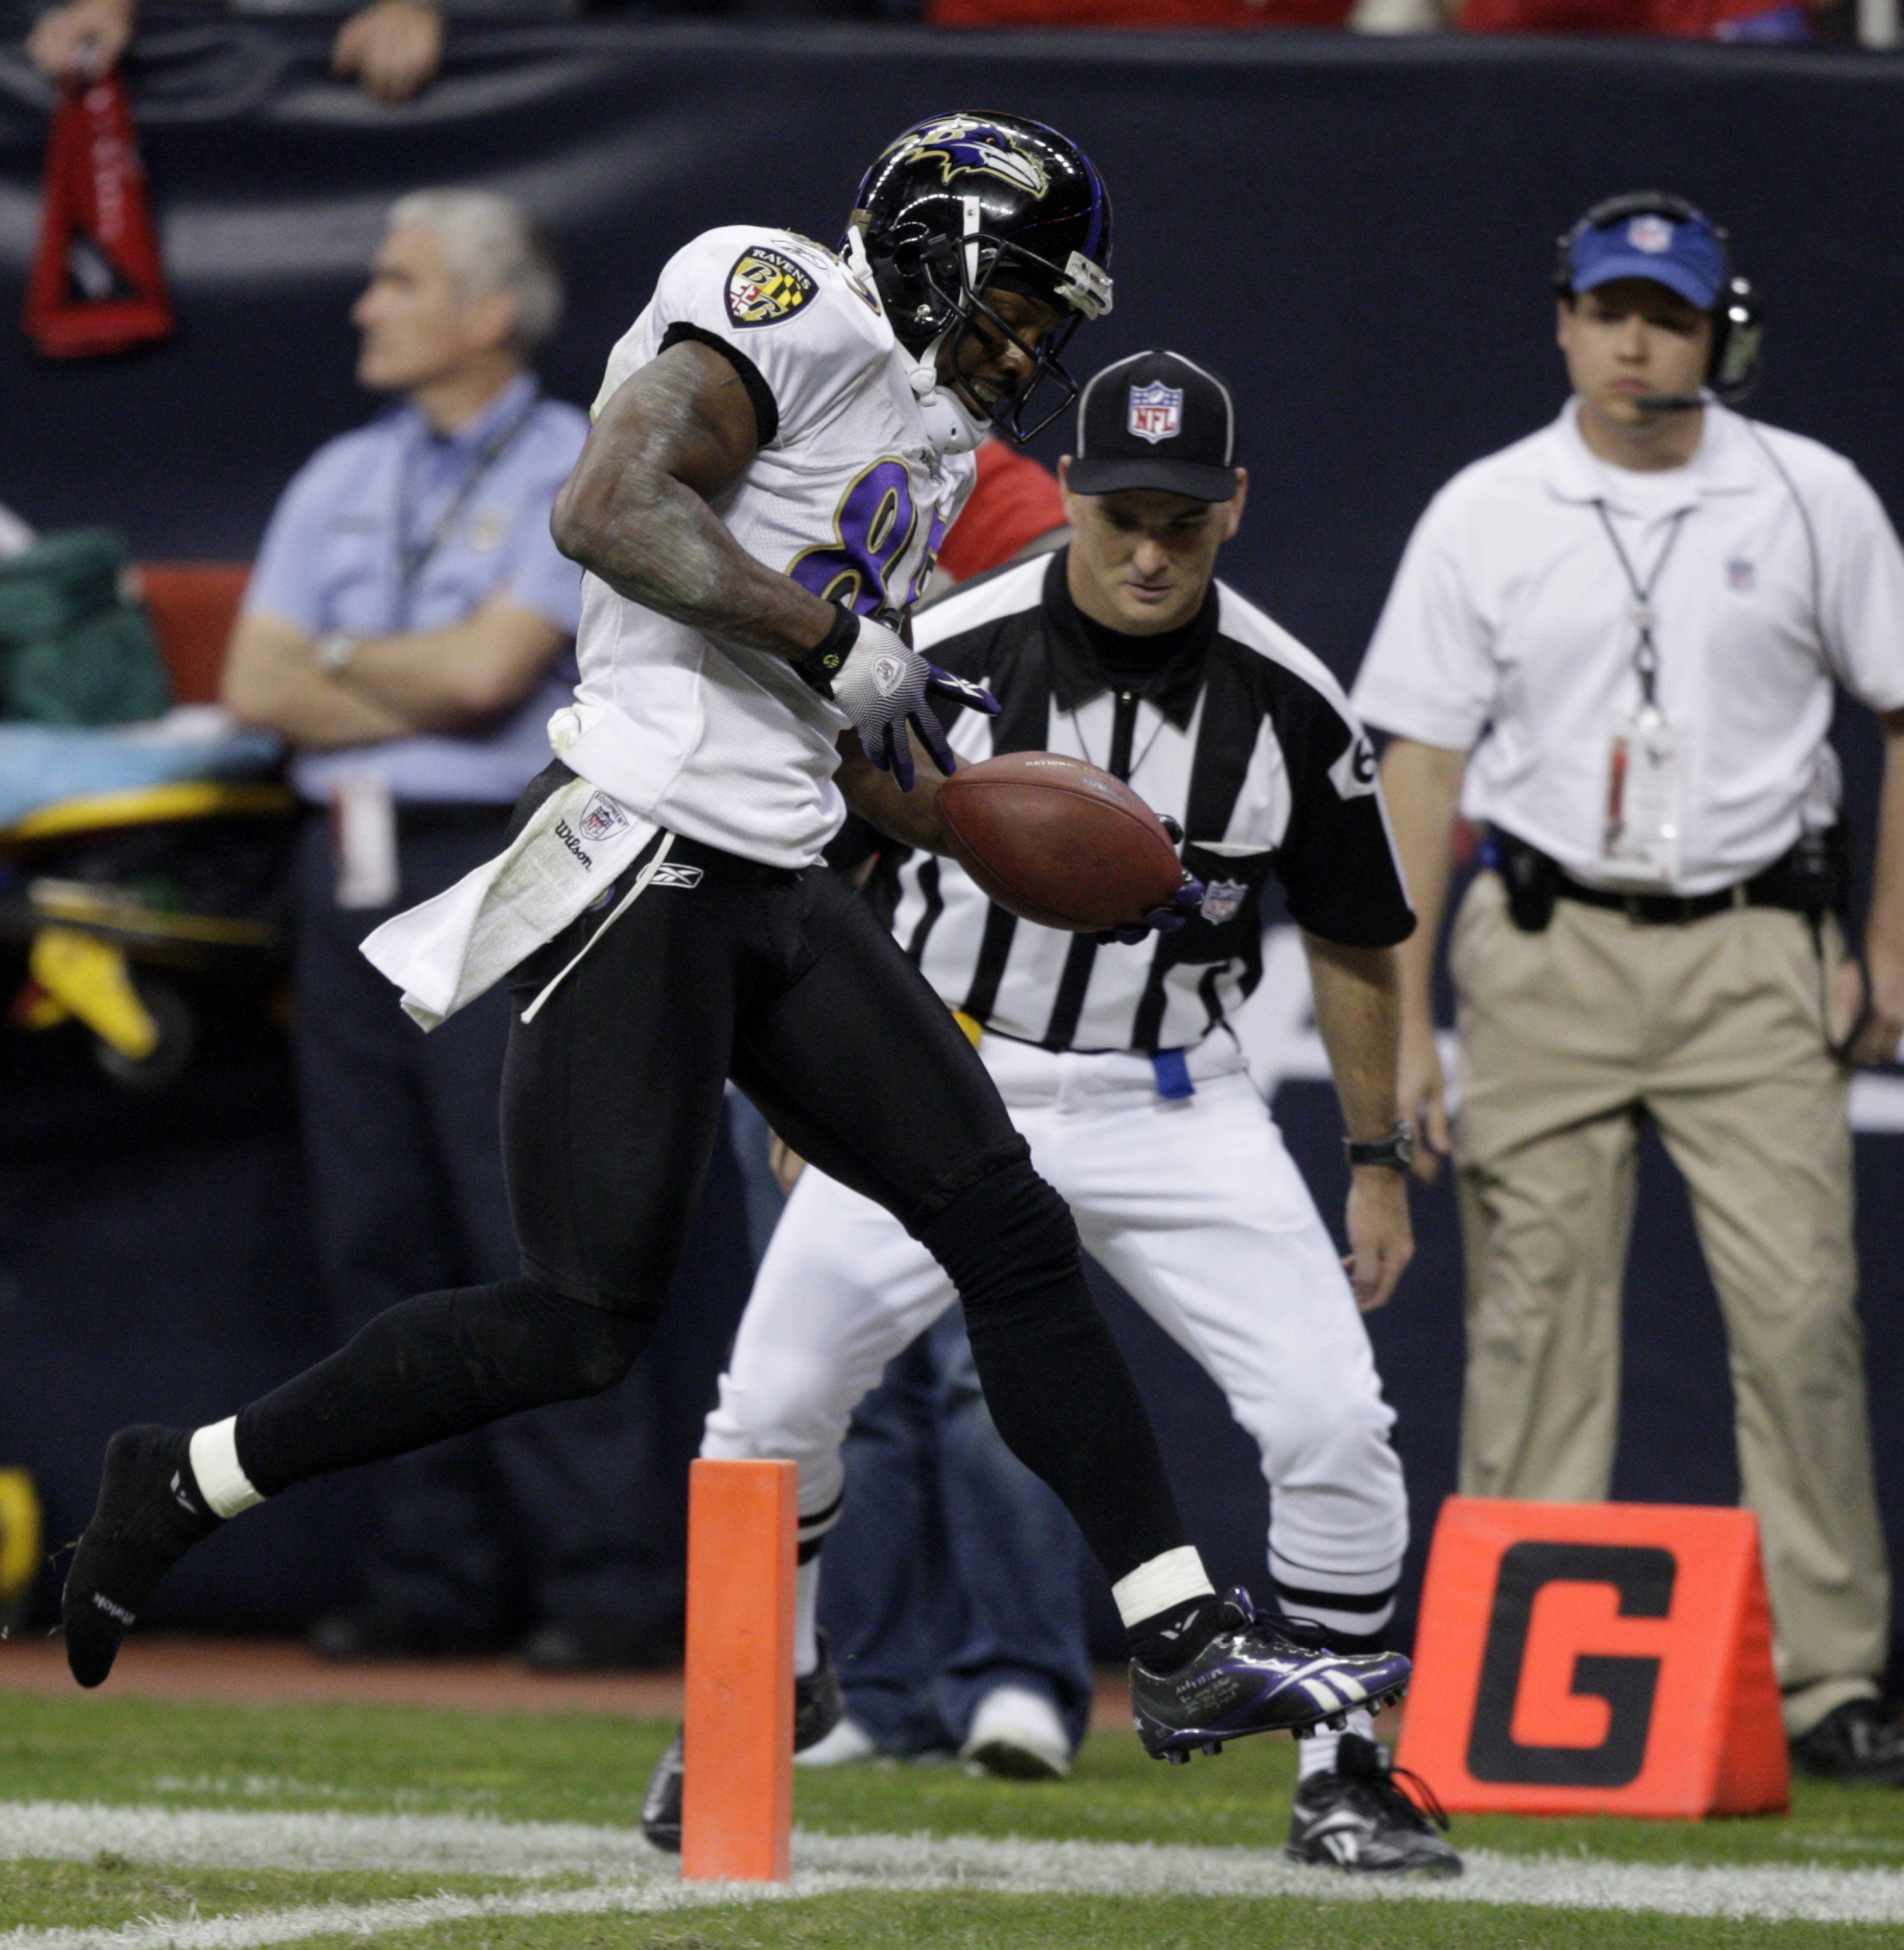 HOUSTON, TX - DECEMBER 13: Wide receiver Derrick Mason #85 of the Baltimore Ravens scores his second toudhdown of the quarter against the Houston Texans at Reliant Stadium on December 13, 2010 in Houston, Texas.  (Photo by Bob Levey/Getty Images)